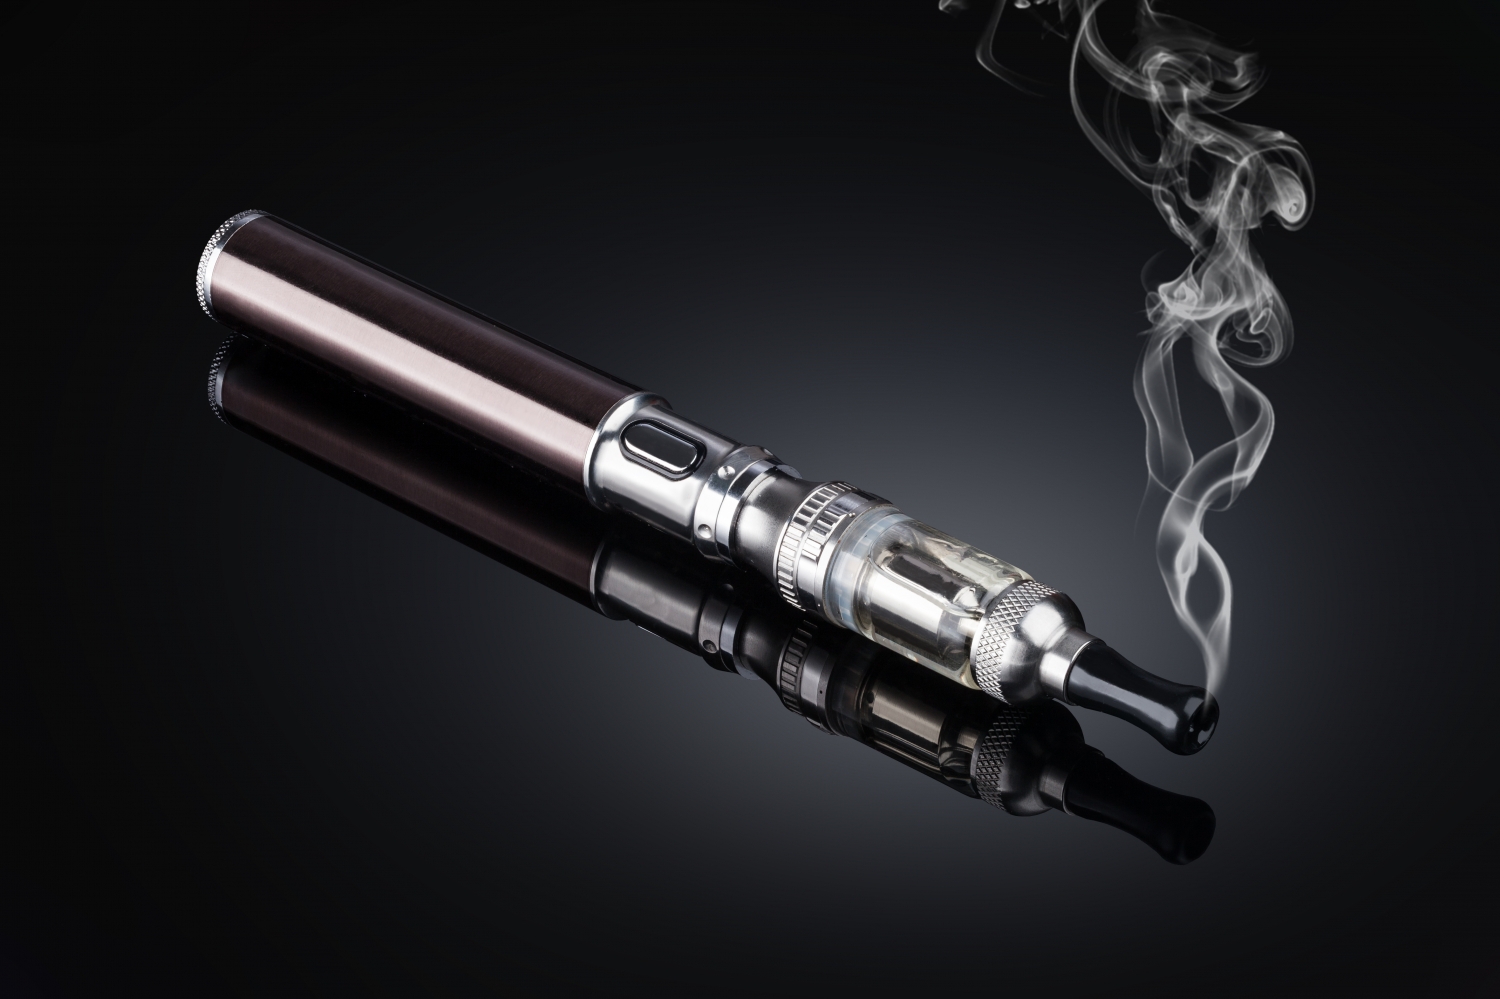 You may need to give up e-cigarettes prior to plastic surgery. To learn more, call Greenwood plastic surgeon Dr. Ted Vaughn at 864-223-0505 today